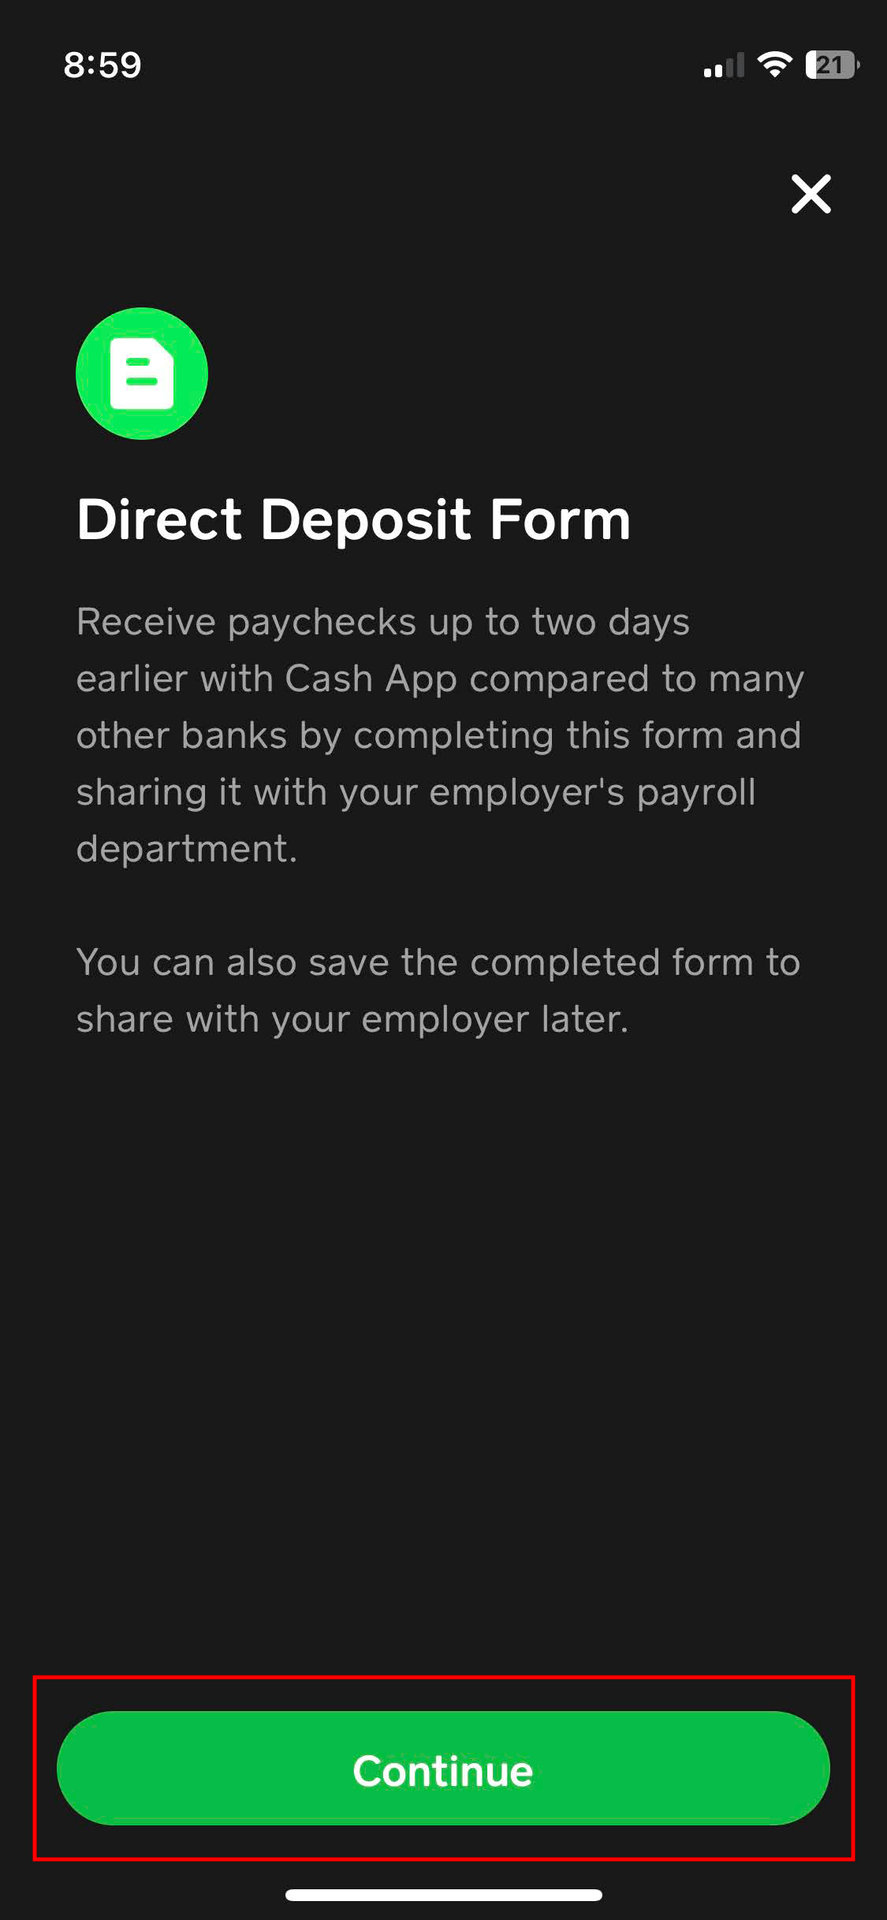 How to get a direct deposit form from Cash App 6